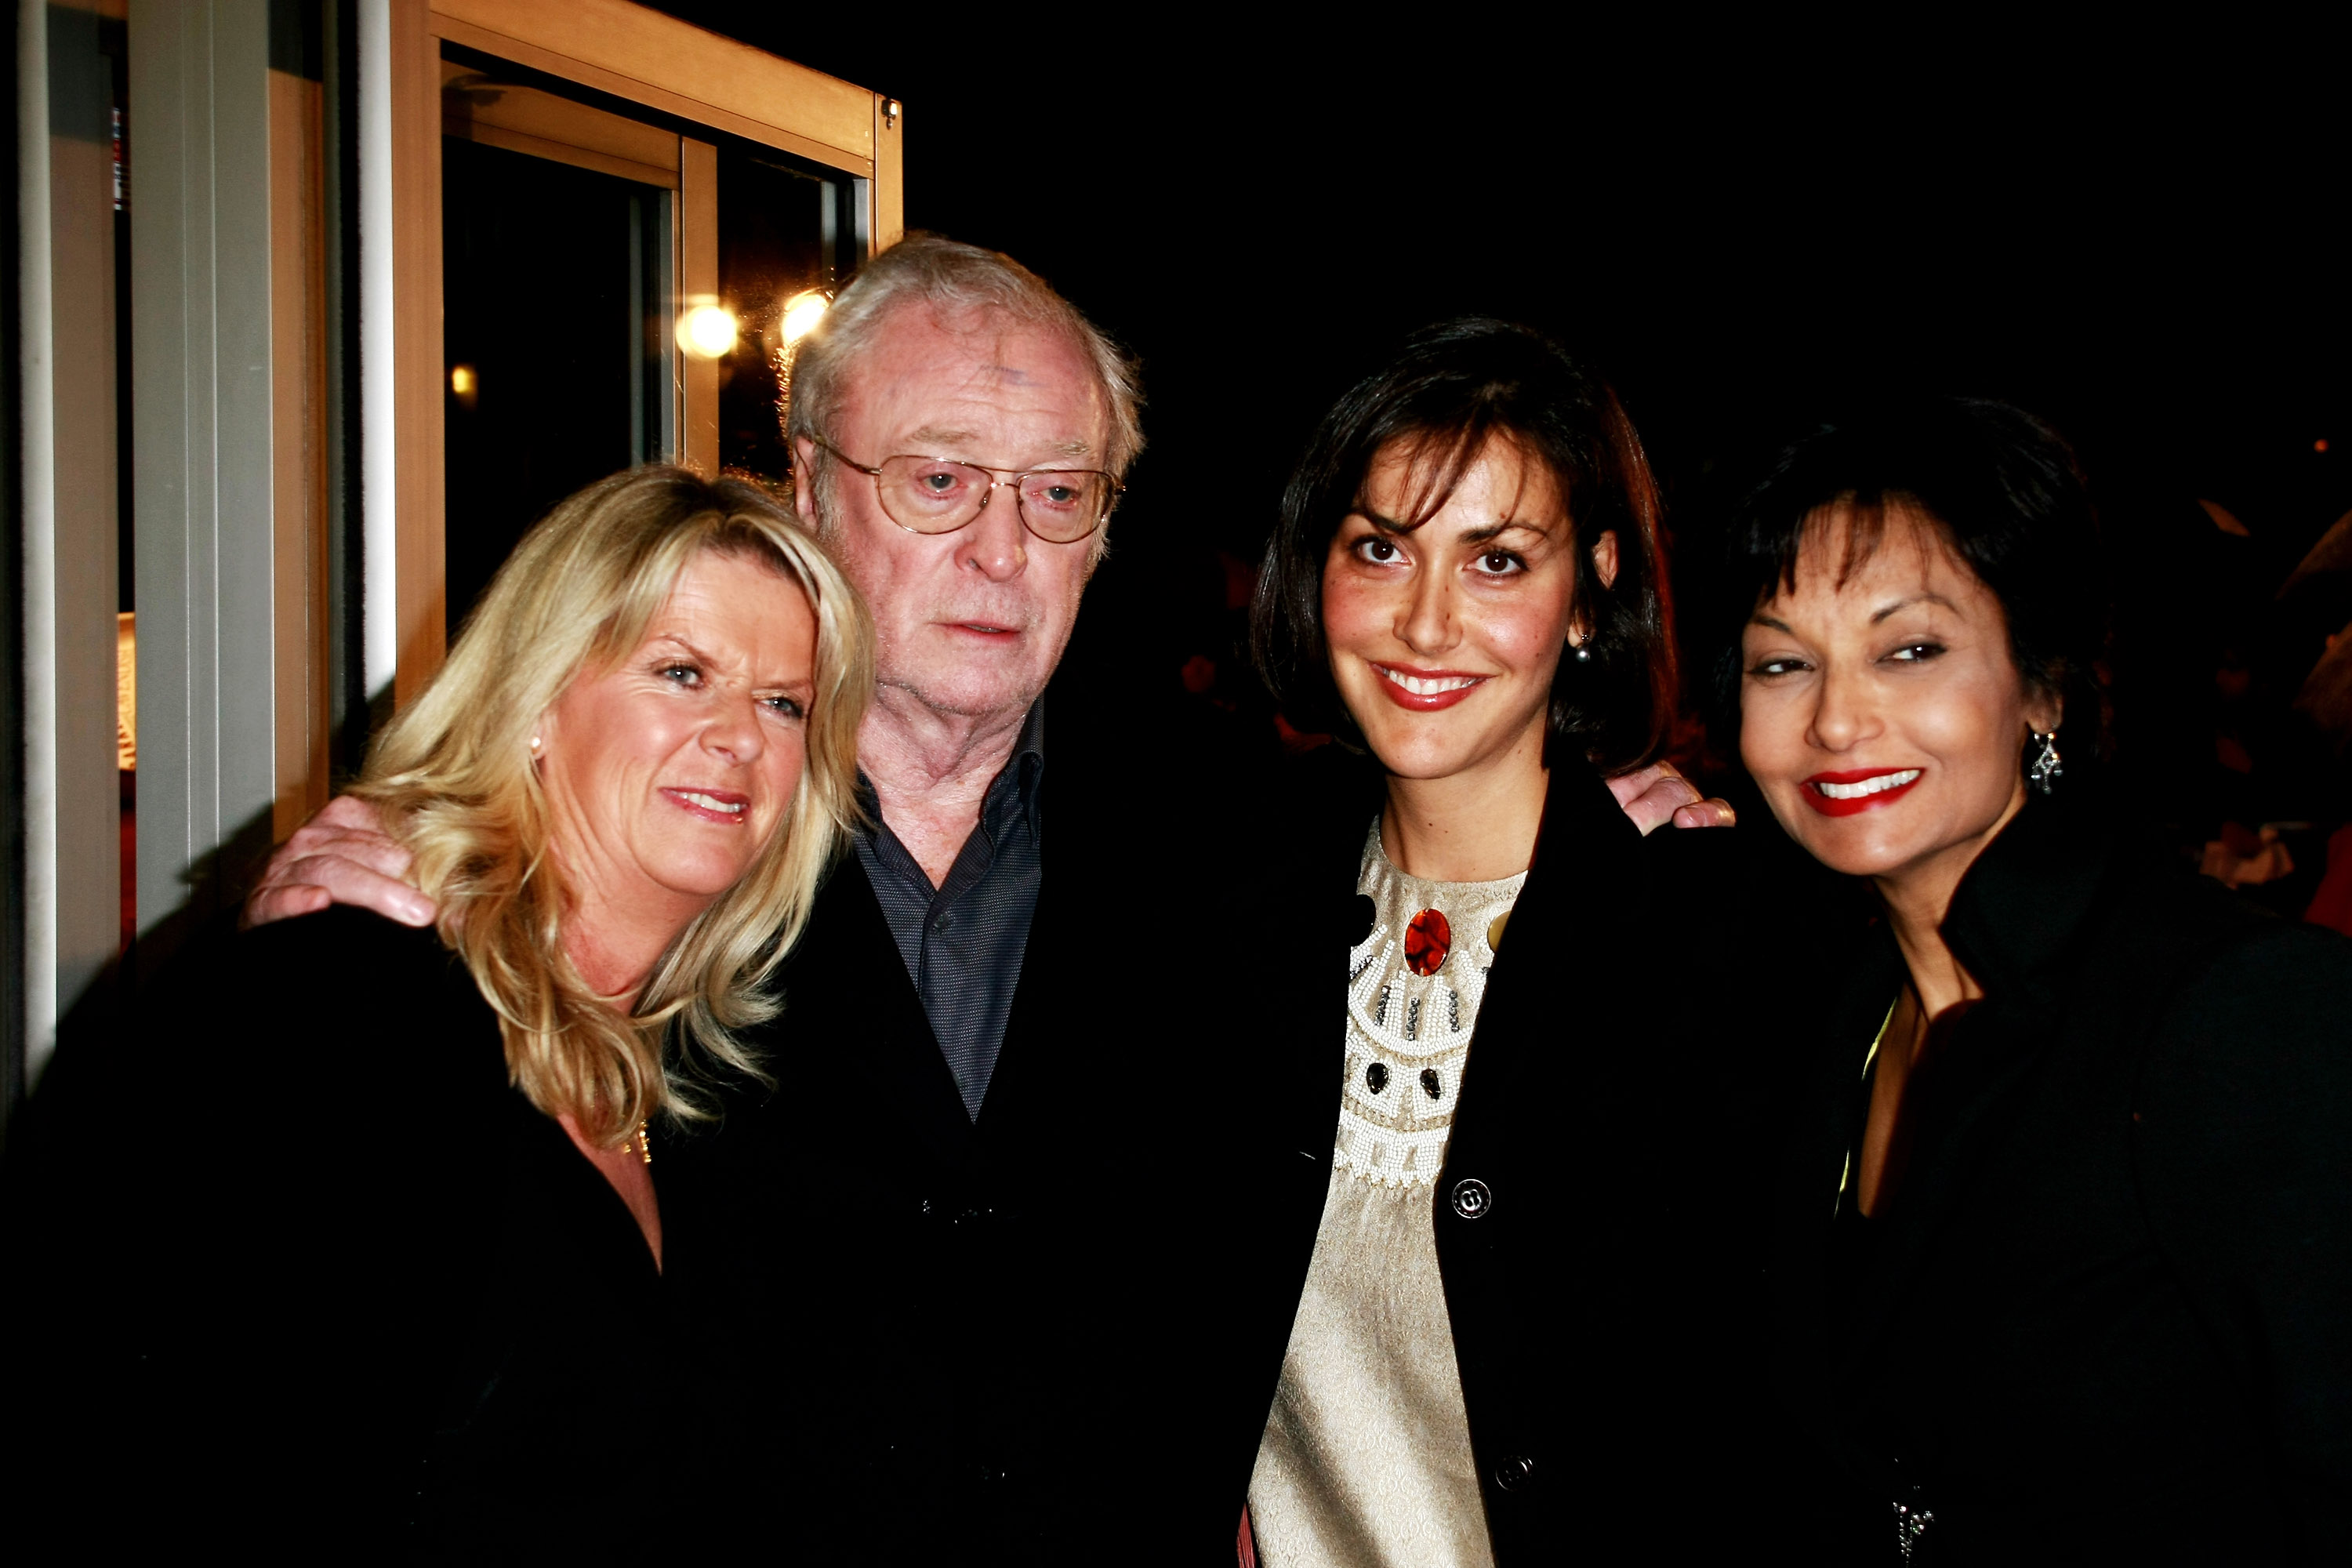 Nikki Caine, Michael Caine, Natasha Caine and Shakira Caine at the UK film premiere of "Sleuth," November 2007 | Source: Getty Images